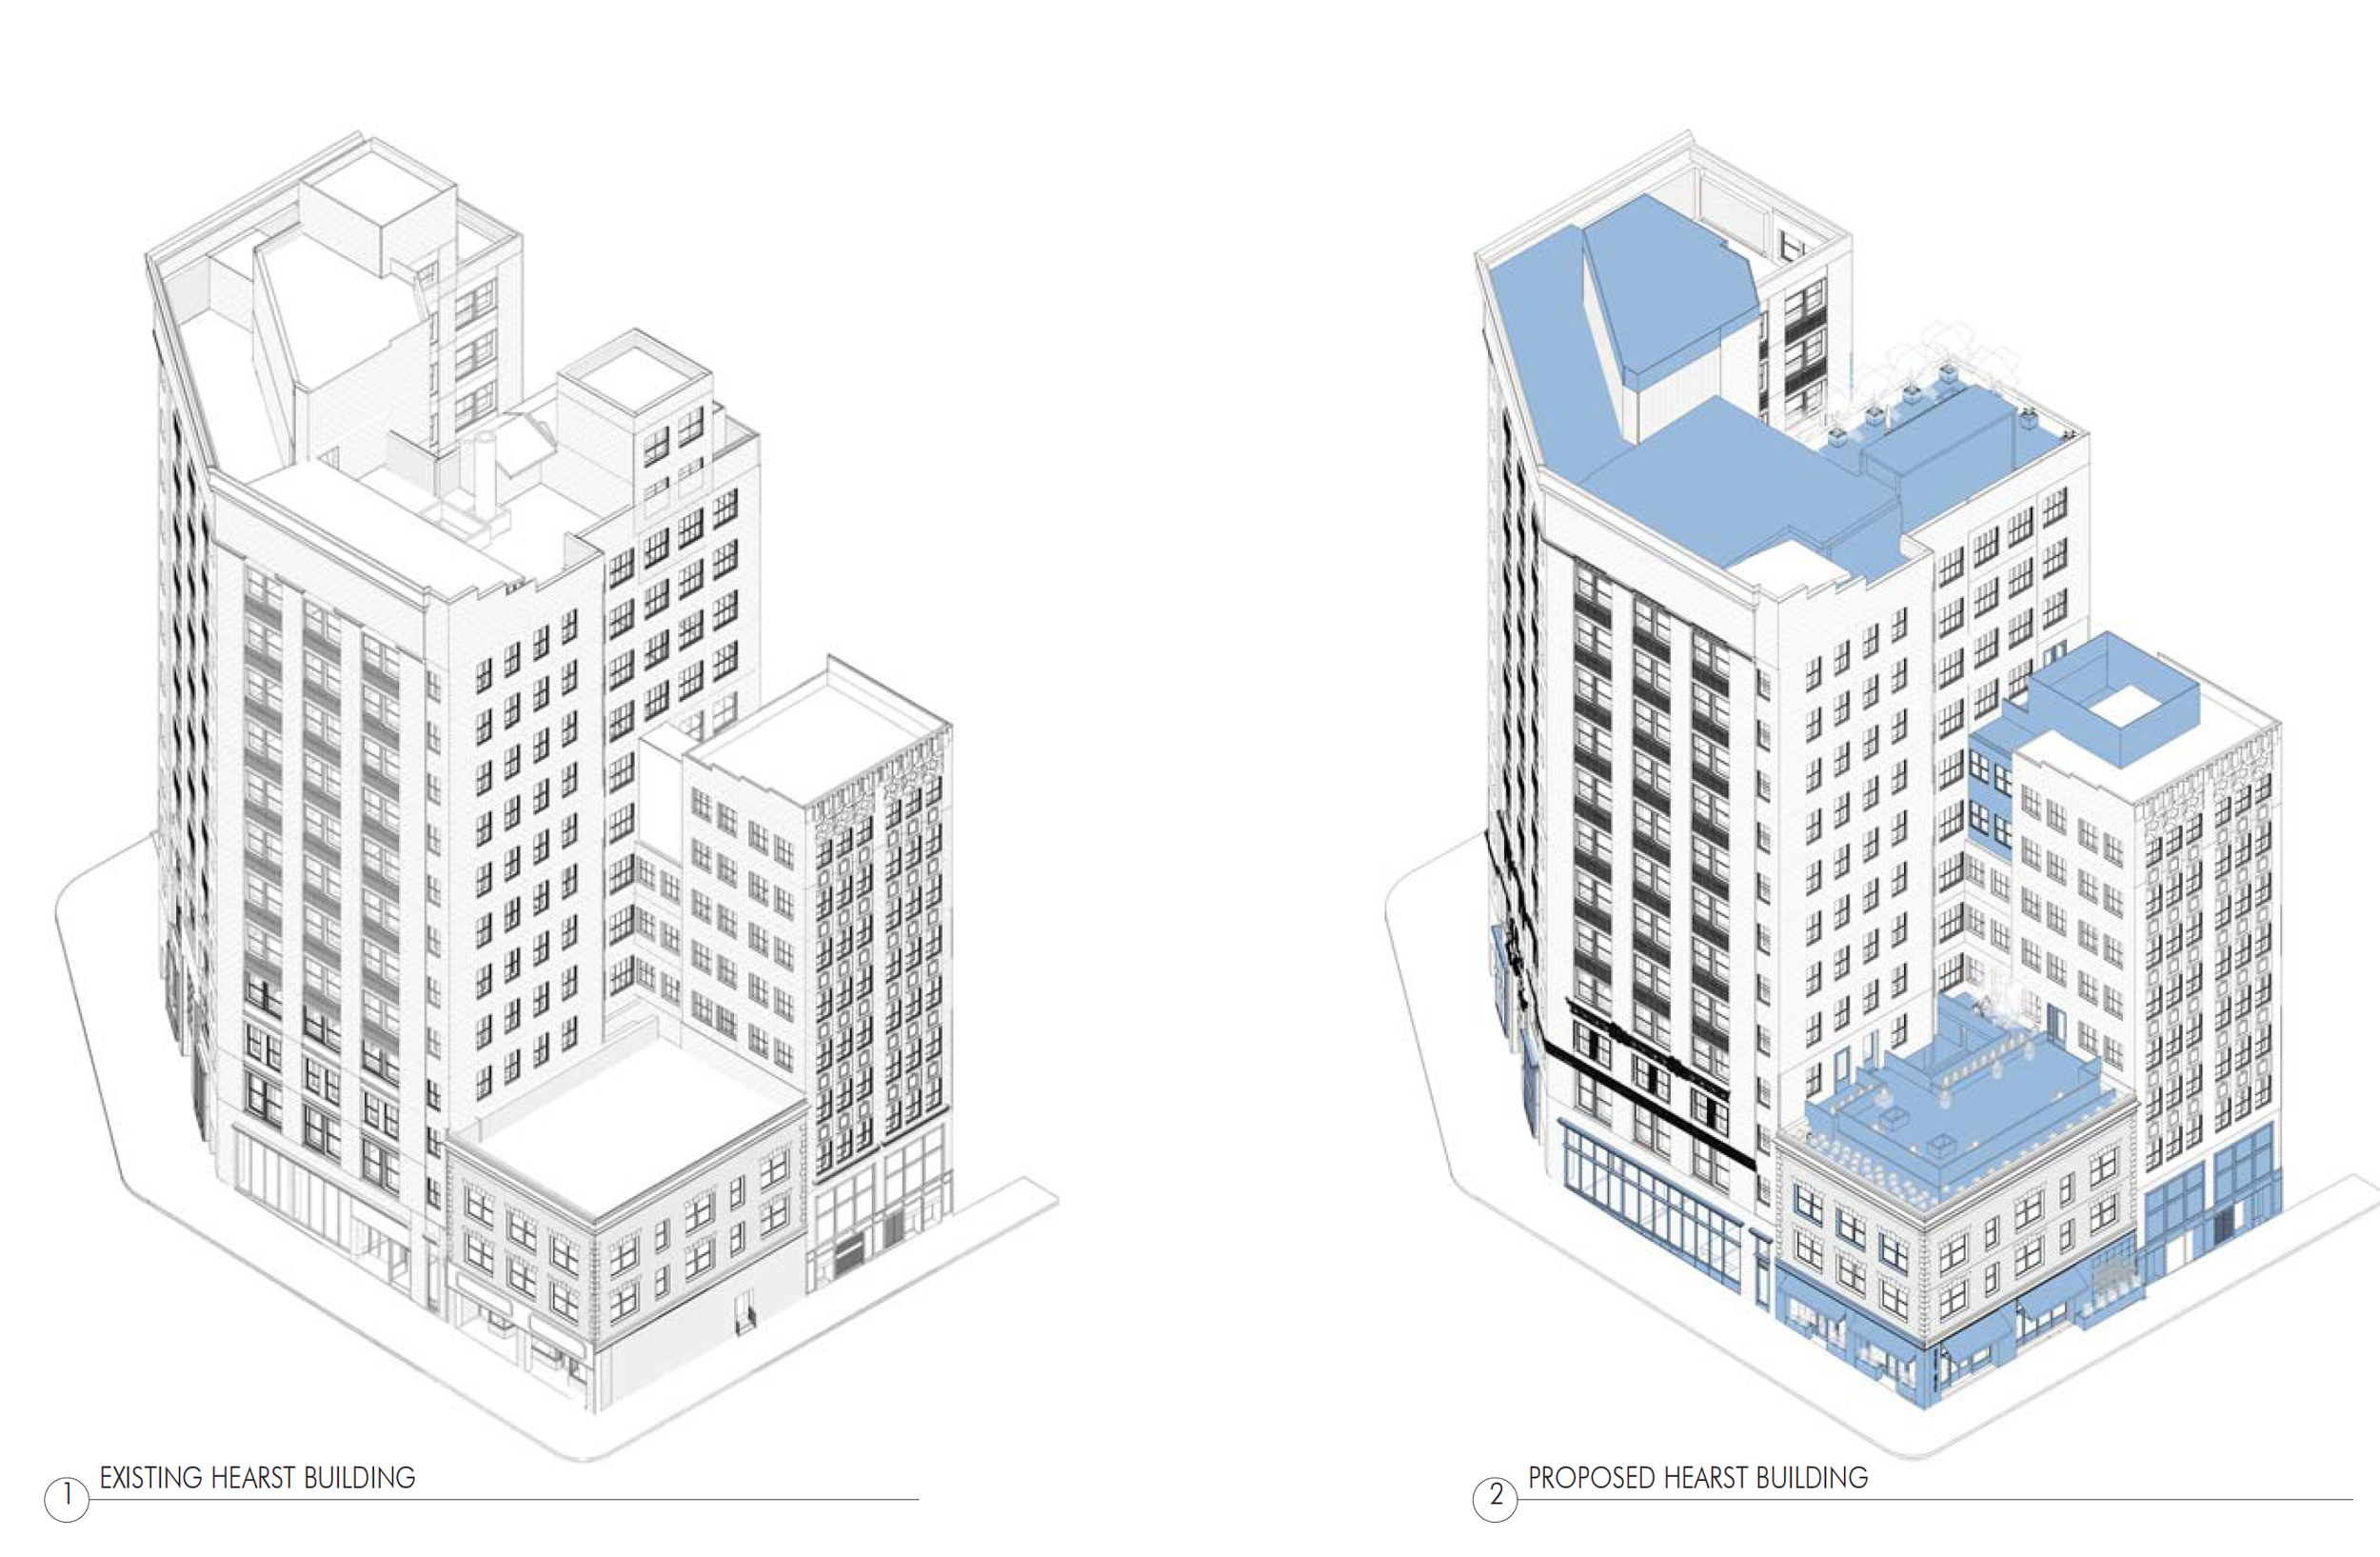 Hearst Building proposed alterations, illustration by Forge